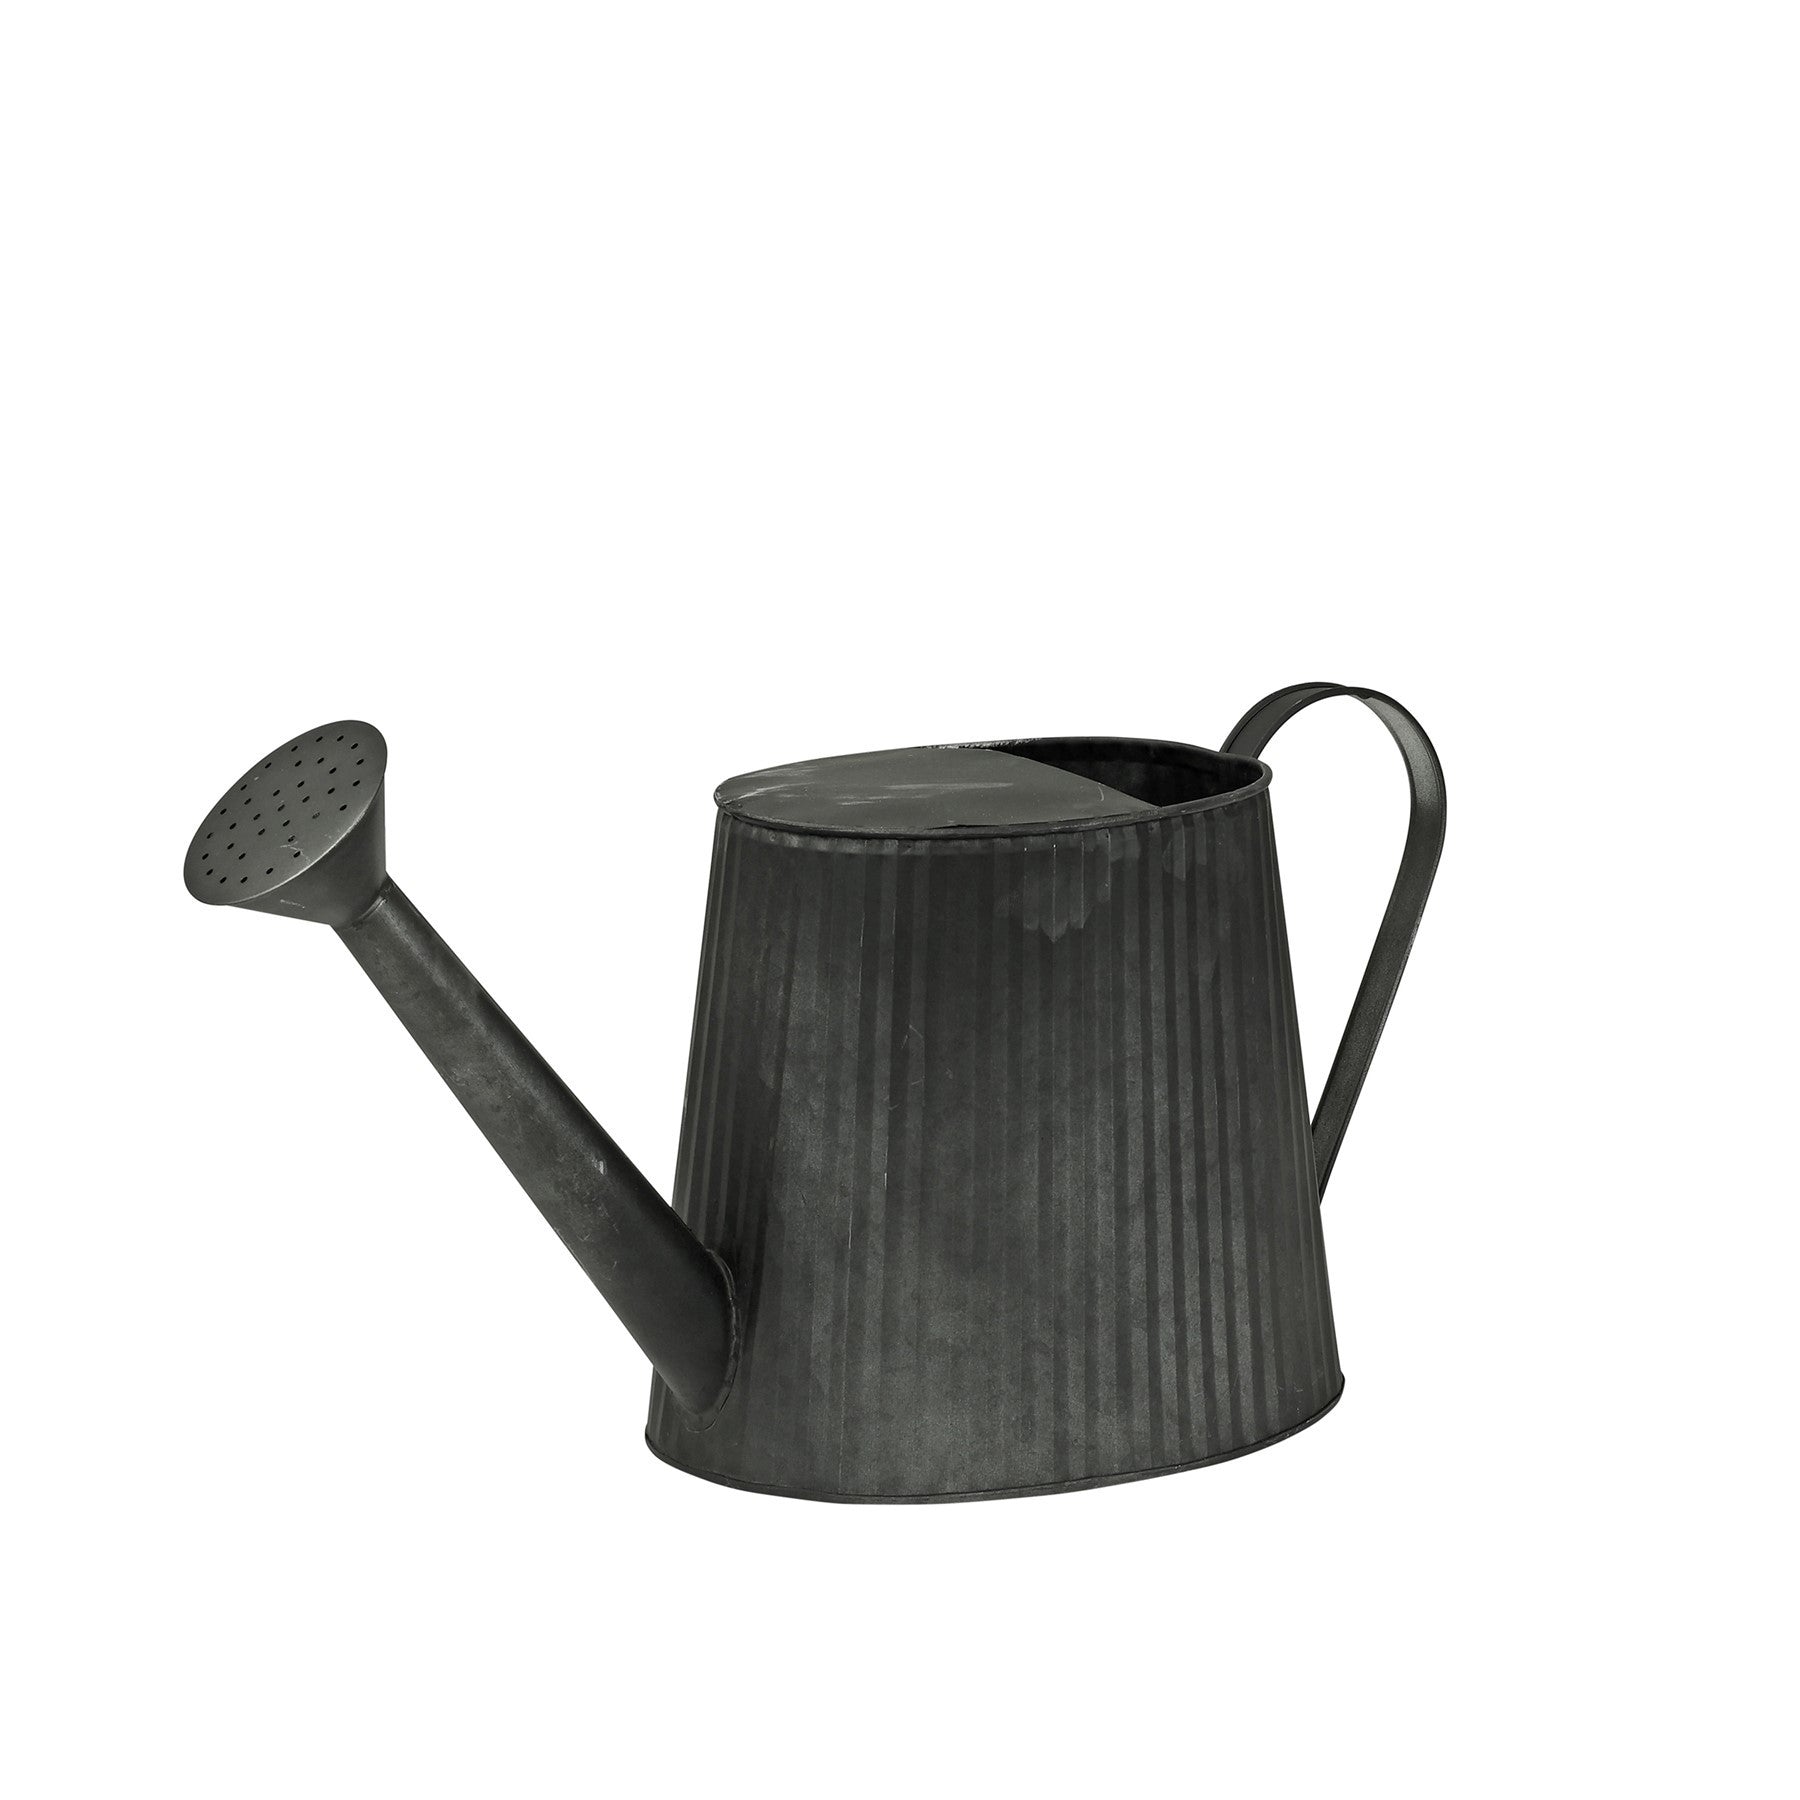 View Charcoal Watering Can Planter 20cm information